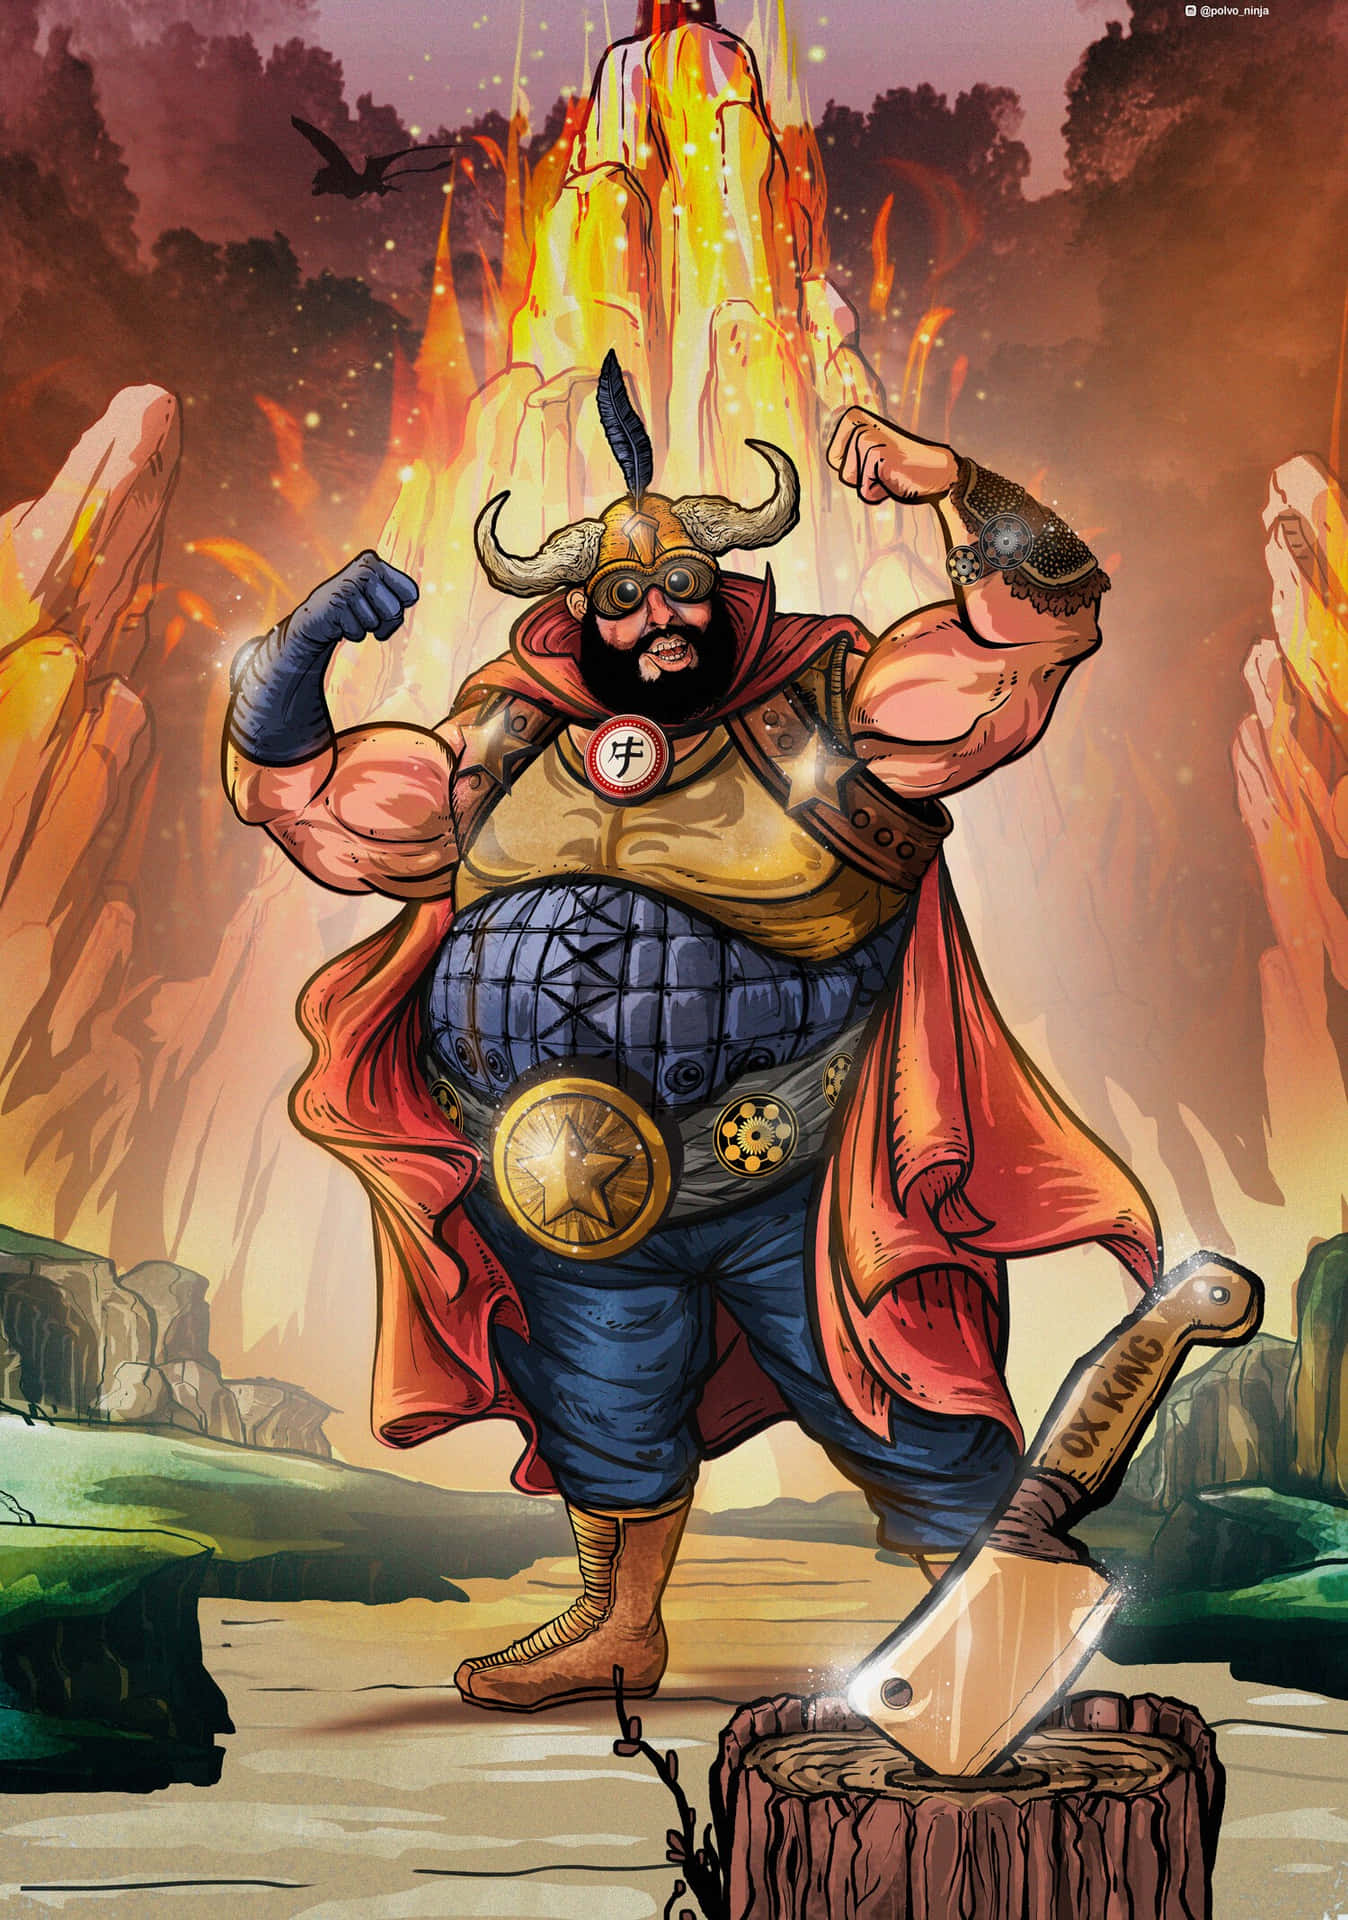 The Ox King, ruler of Fire Mountain" Wallpaper